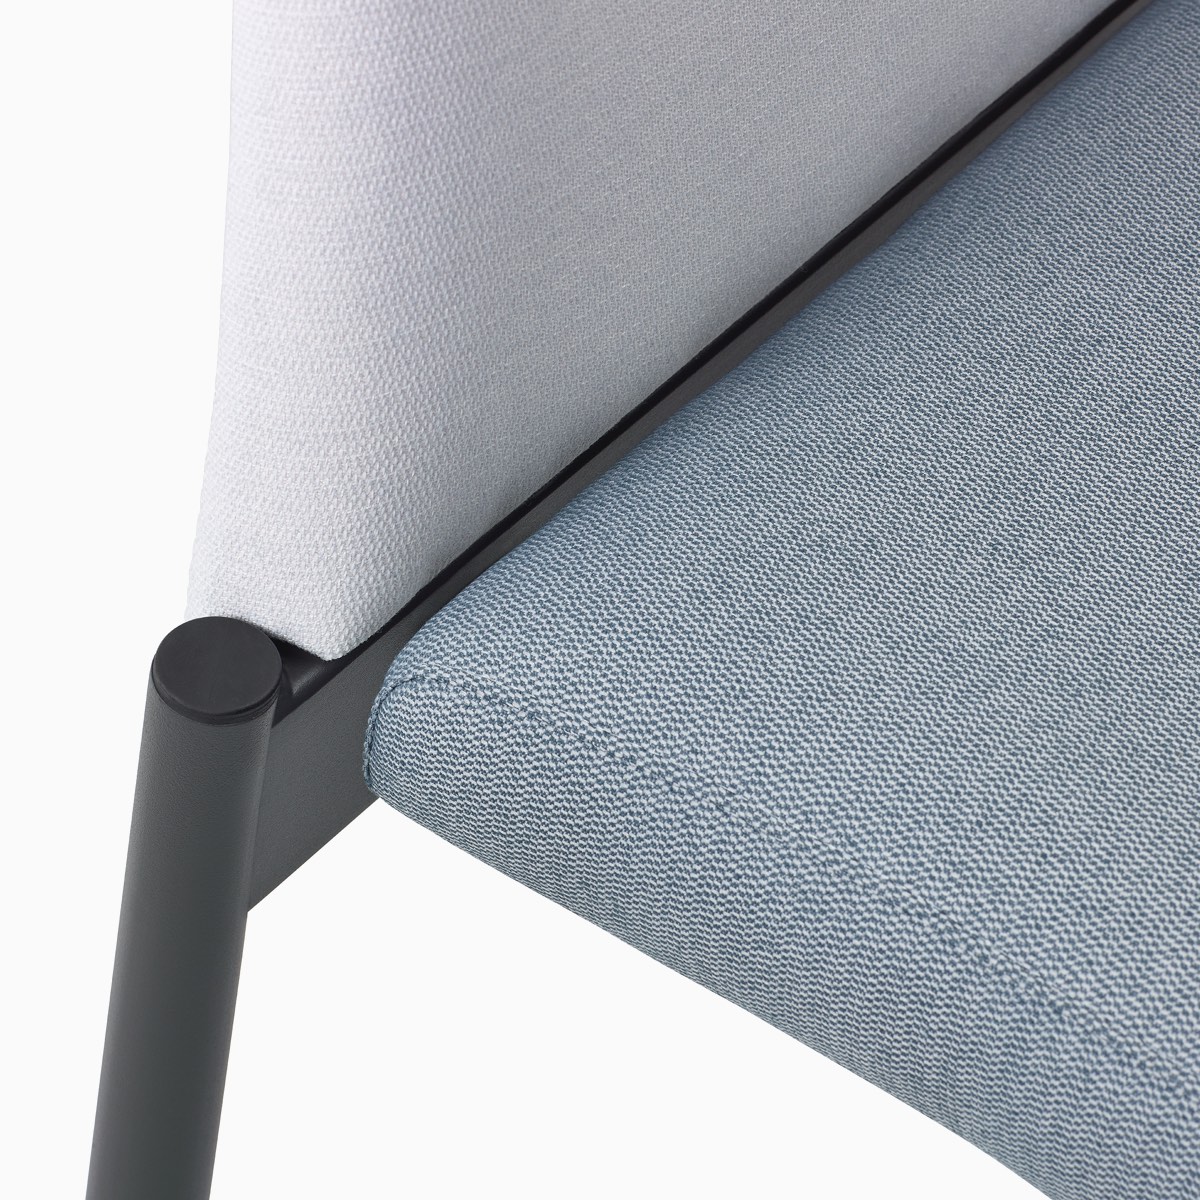 Detail of the clean out gap in a Valor Stacking Chair without arms in a white back upholstery, a light blue seat upholstery, and a black frame.